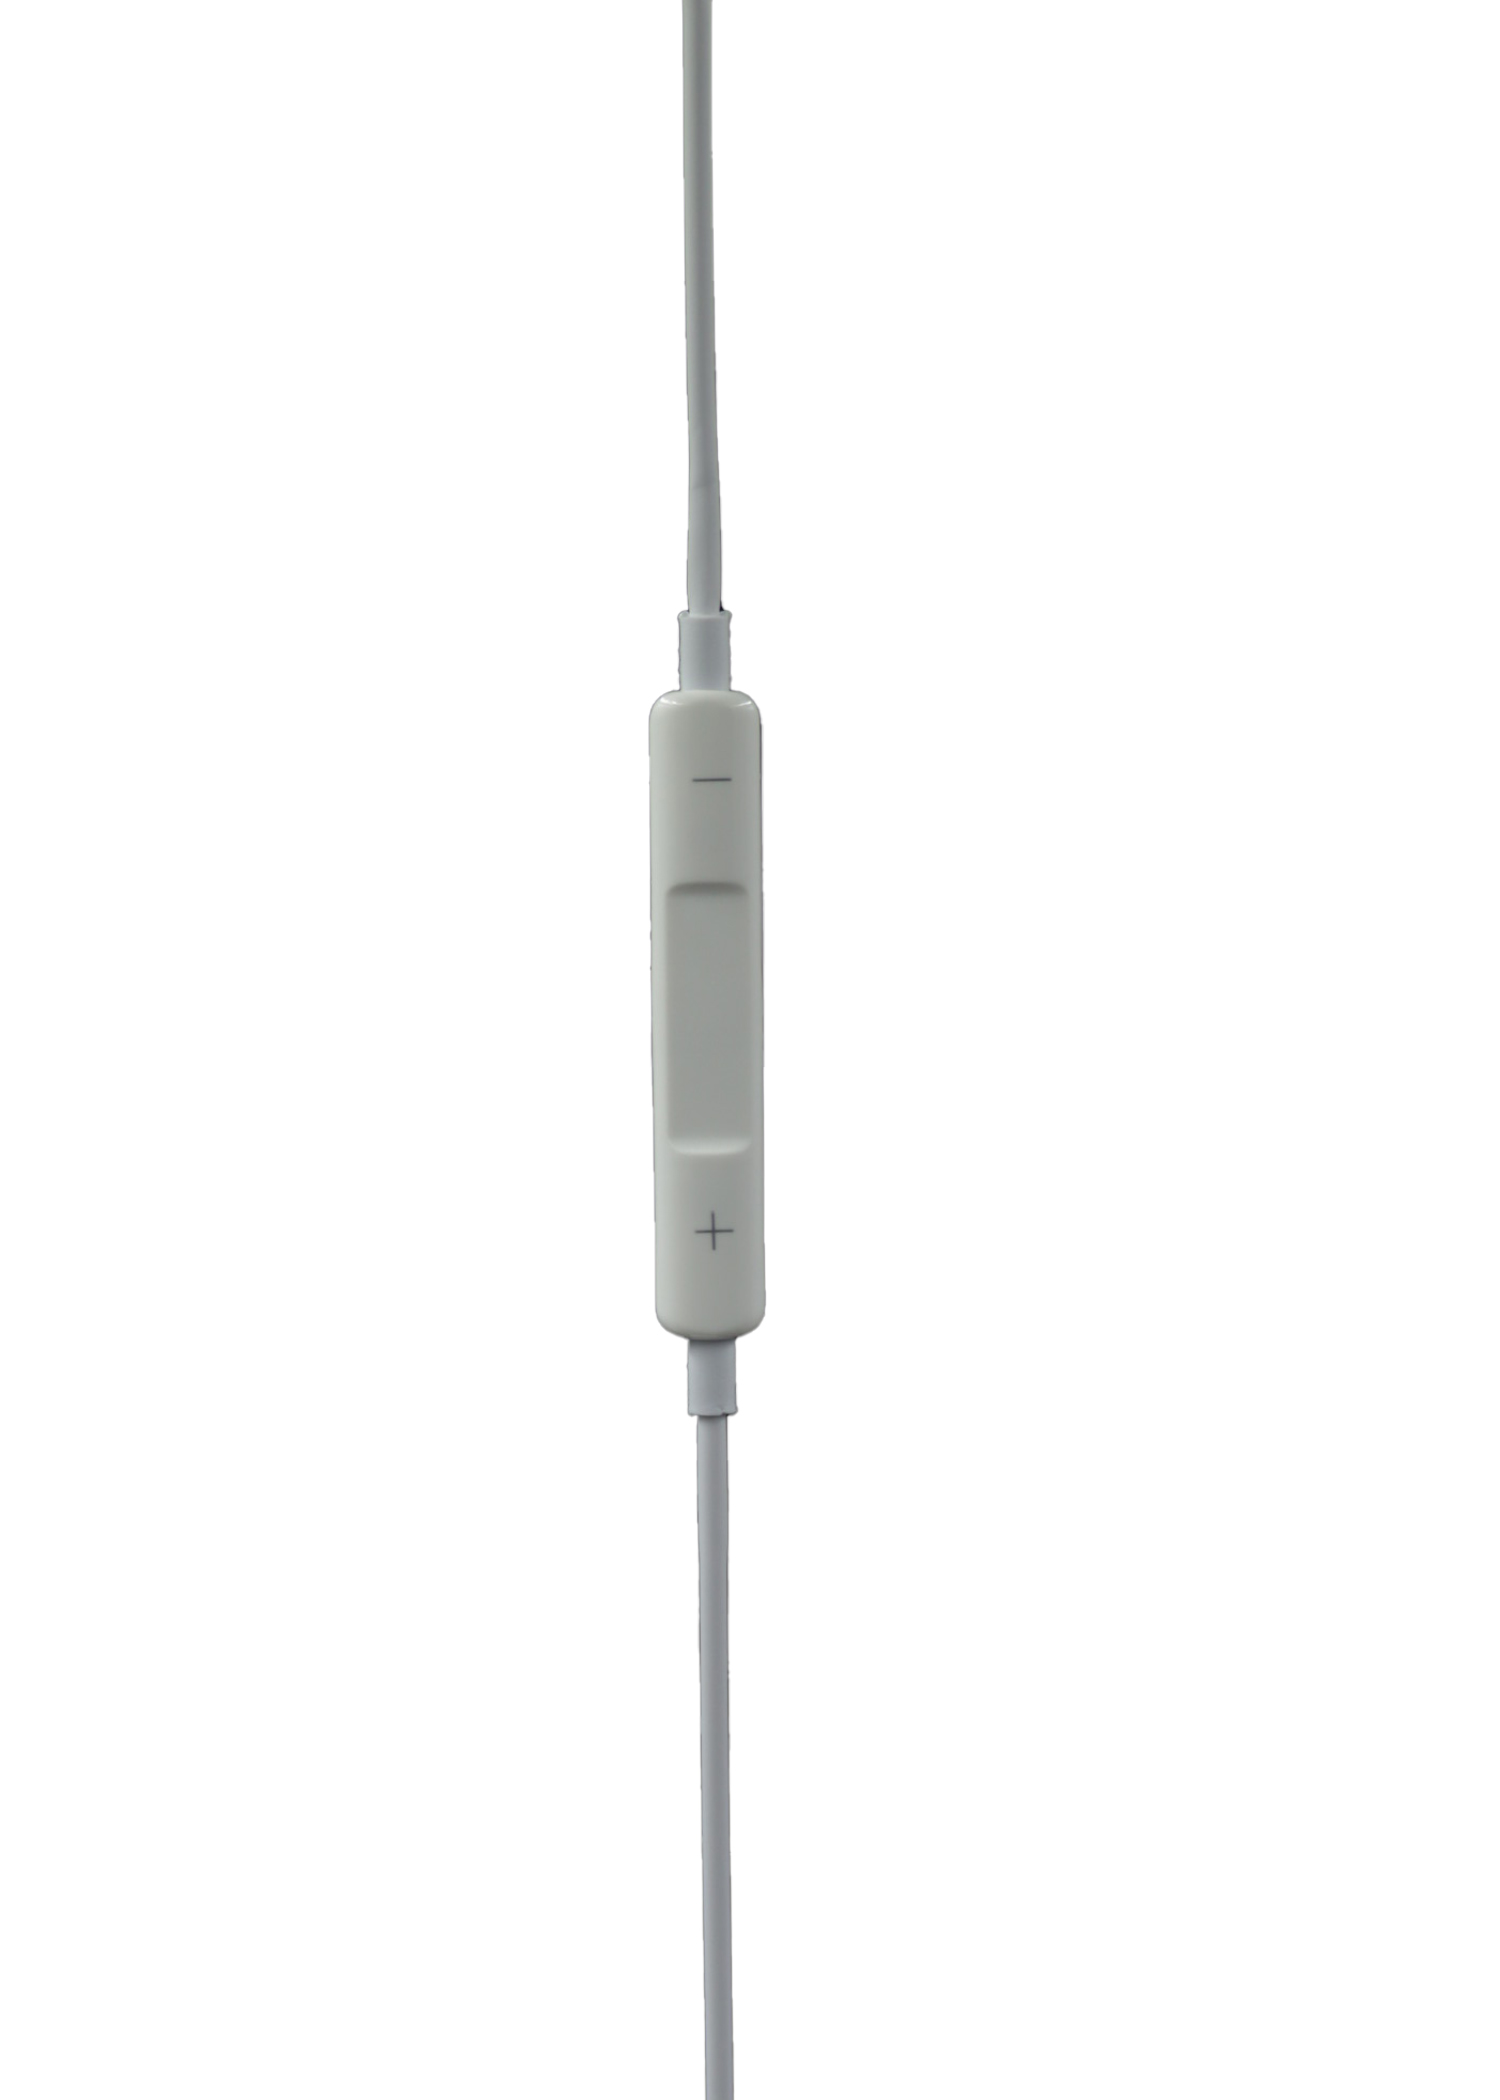 iPhone Earphones With HQ Voice & Music